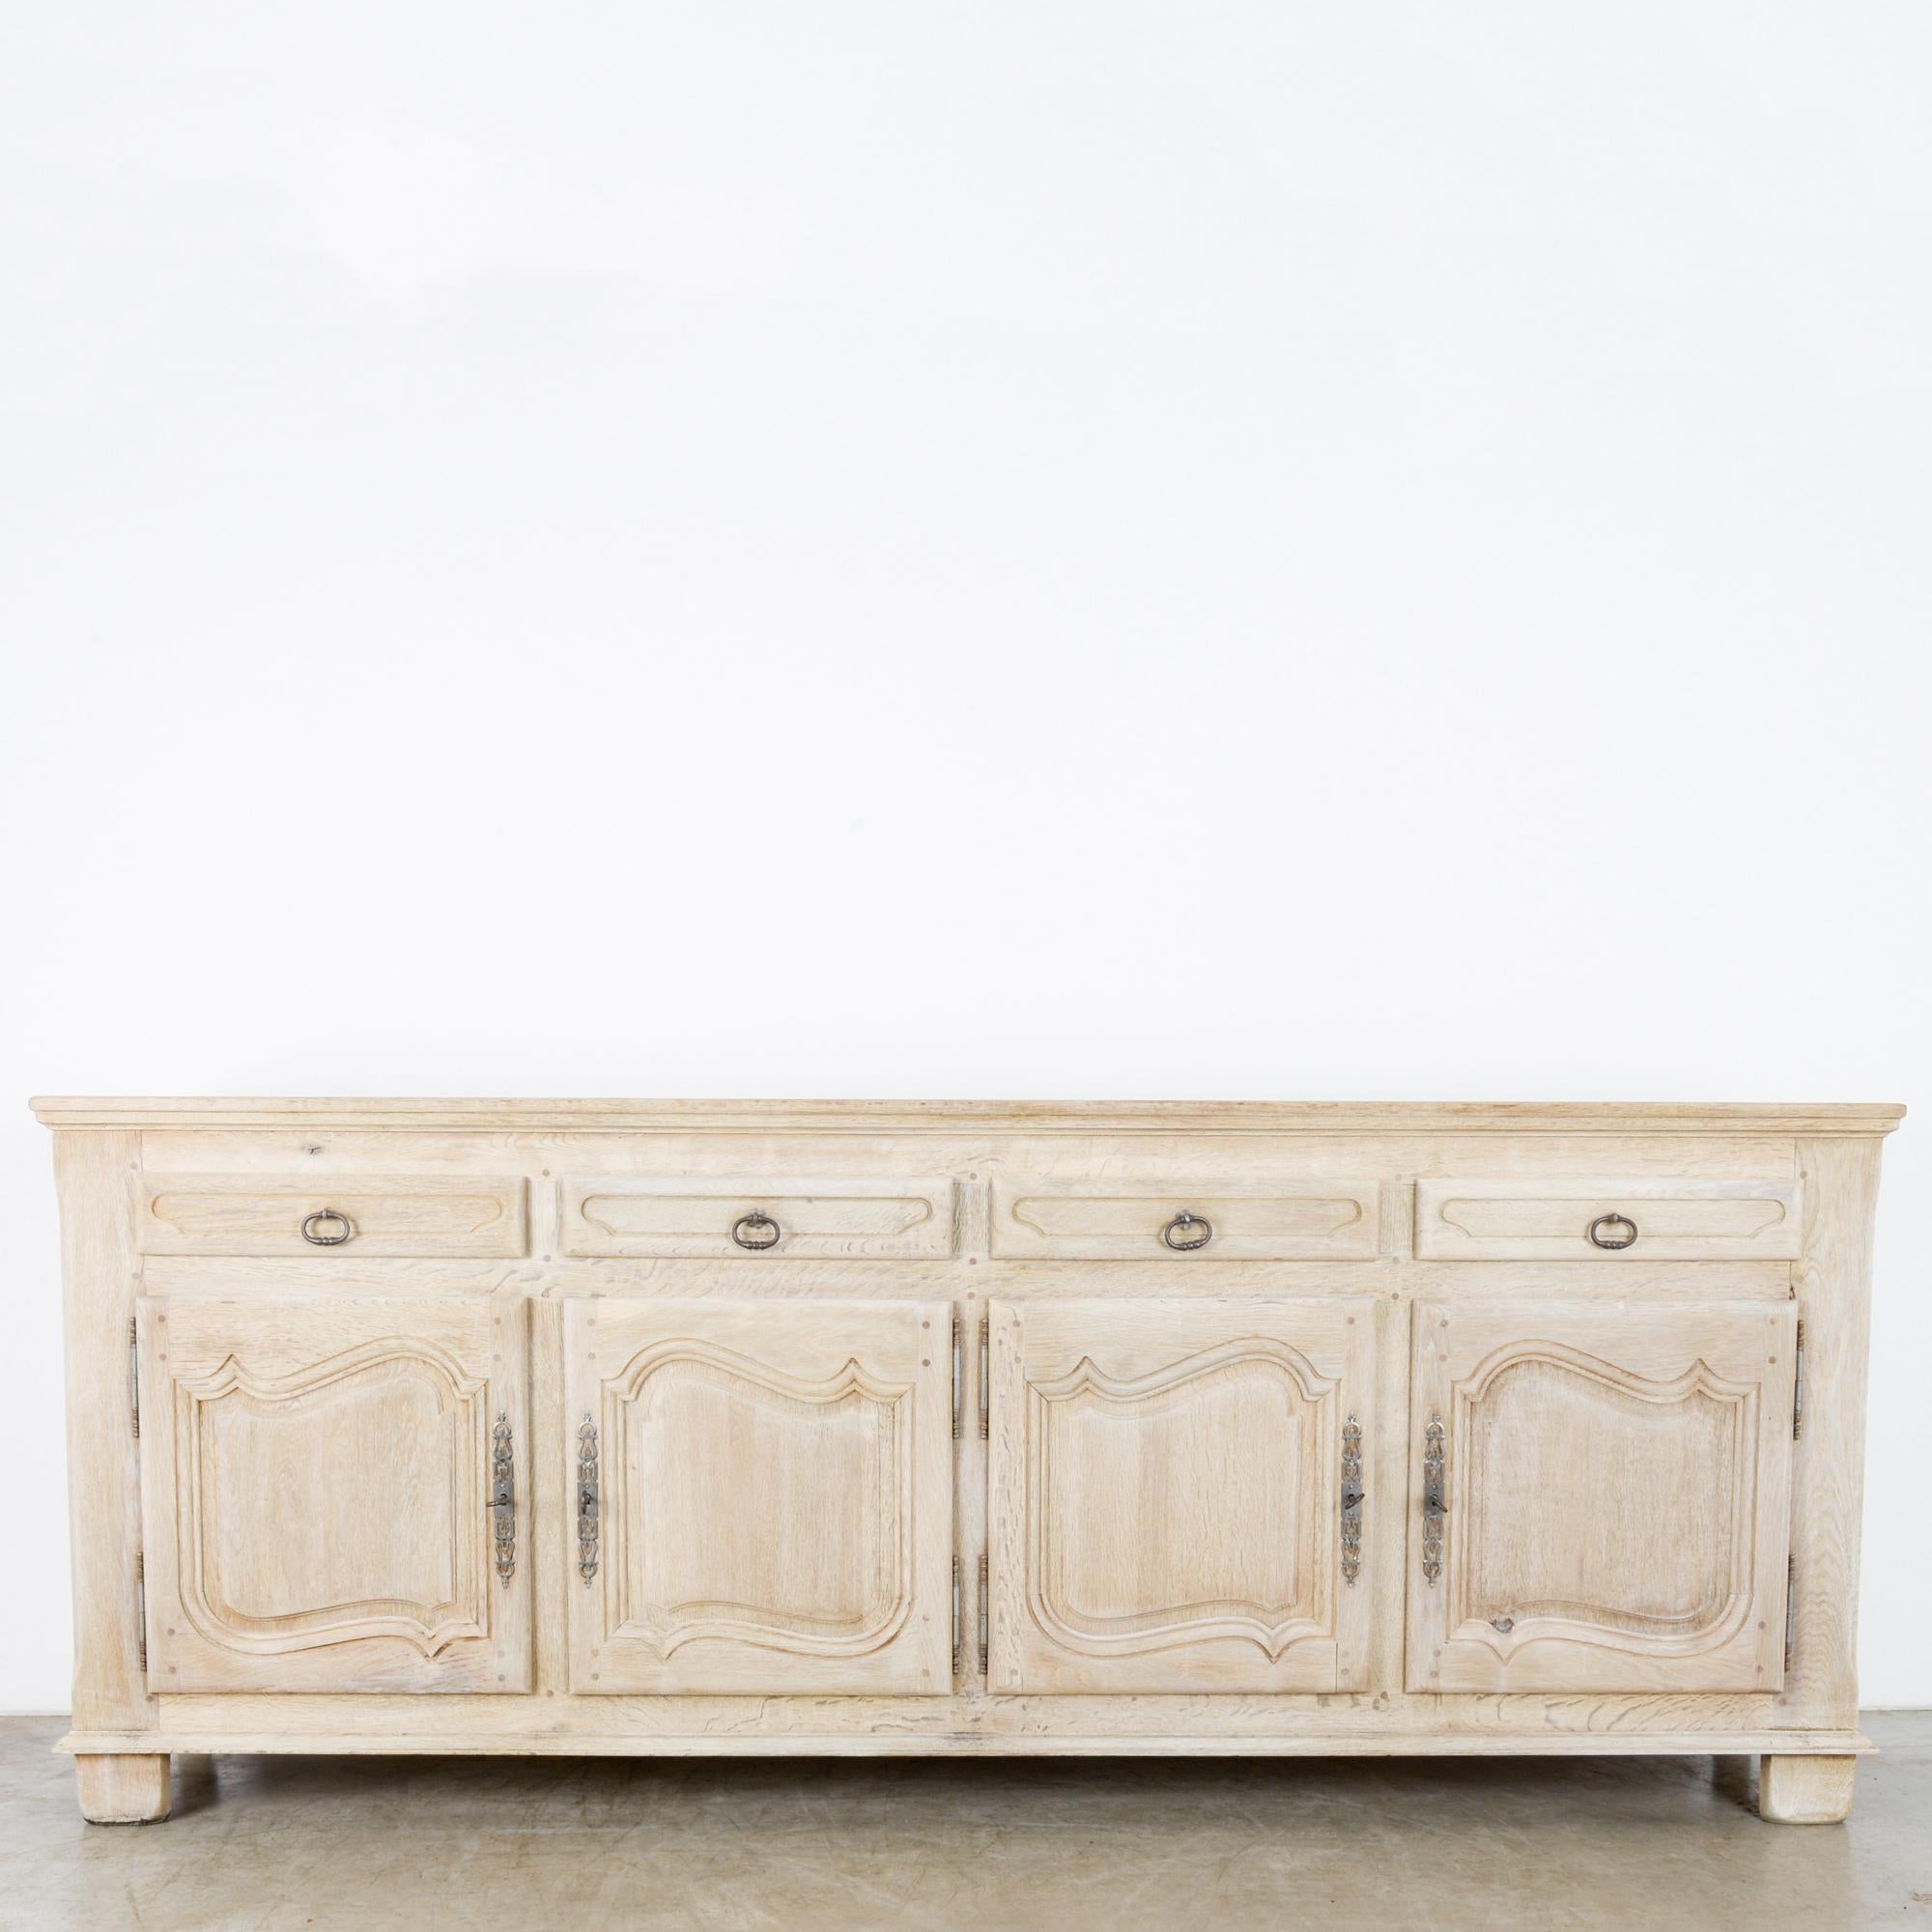 A bleached oak buffet from Belgium, circa 1970. At over eight feet long, this gorgeous buffet has storage galore in its quadruple drawers and double pair of cabinets. Raised on four feet, the undulating arches of the cabinet panels frame arabesque